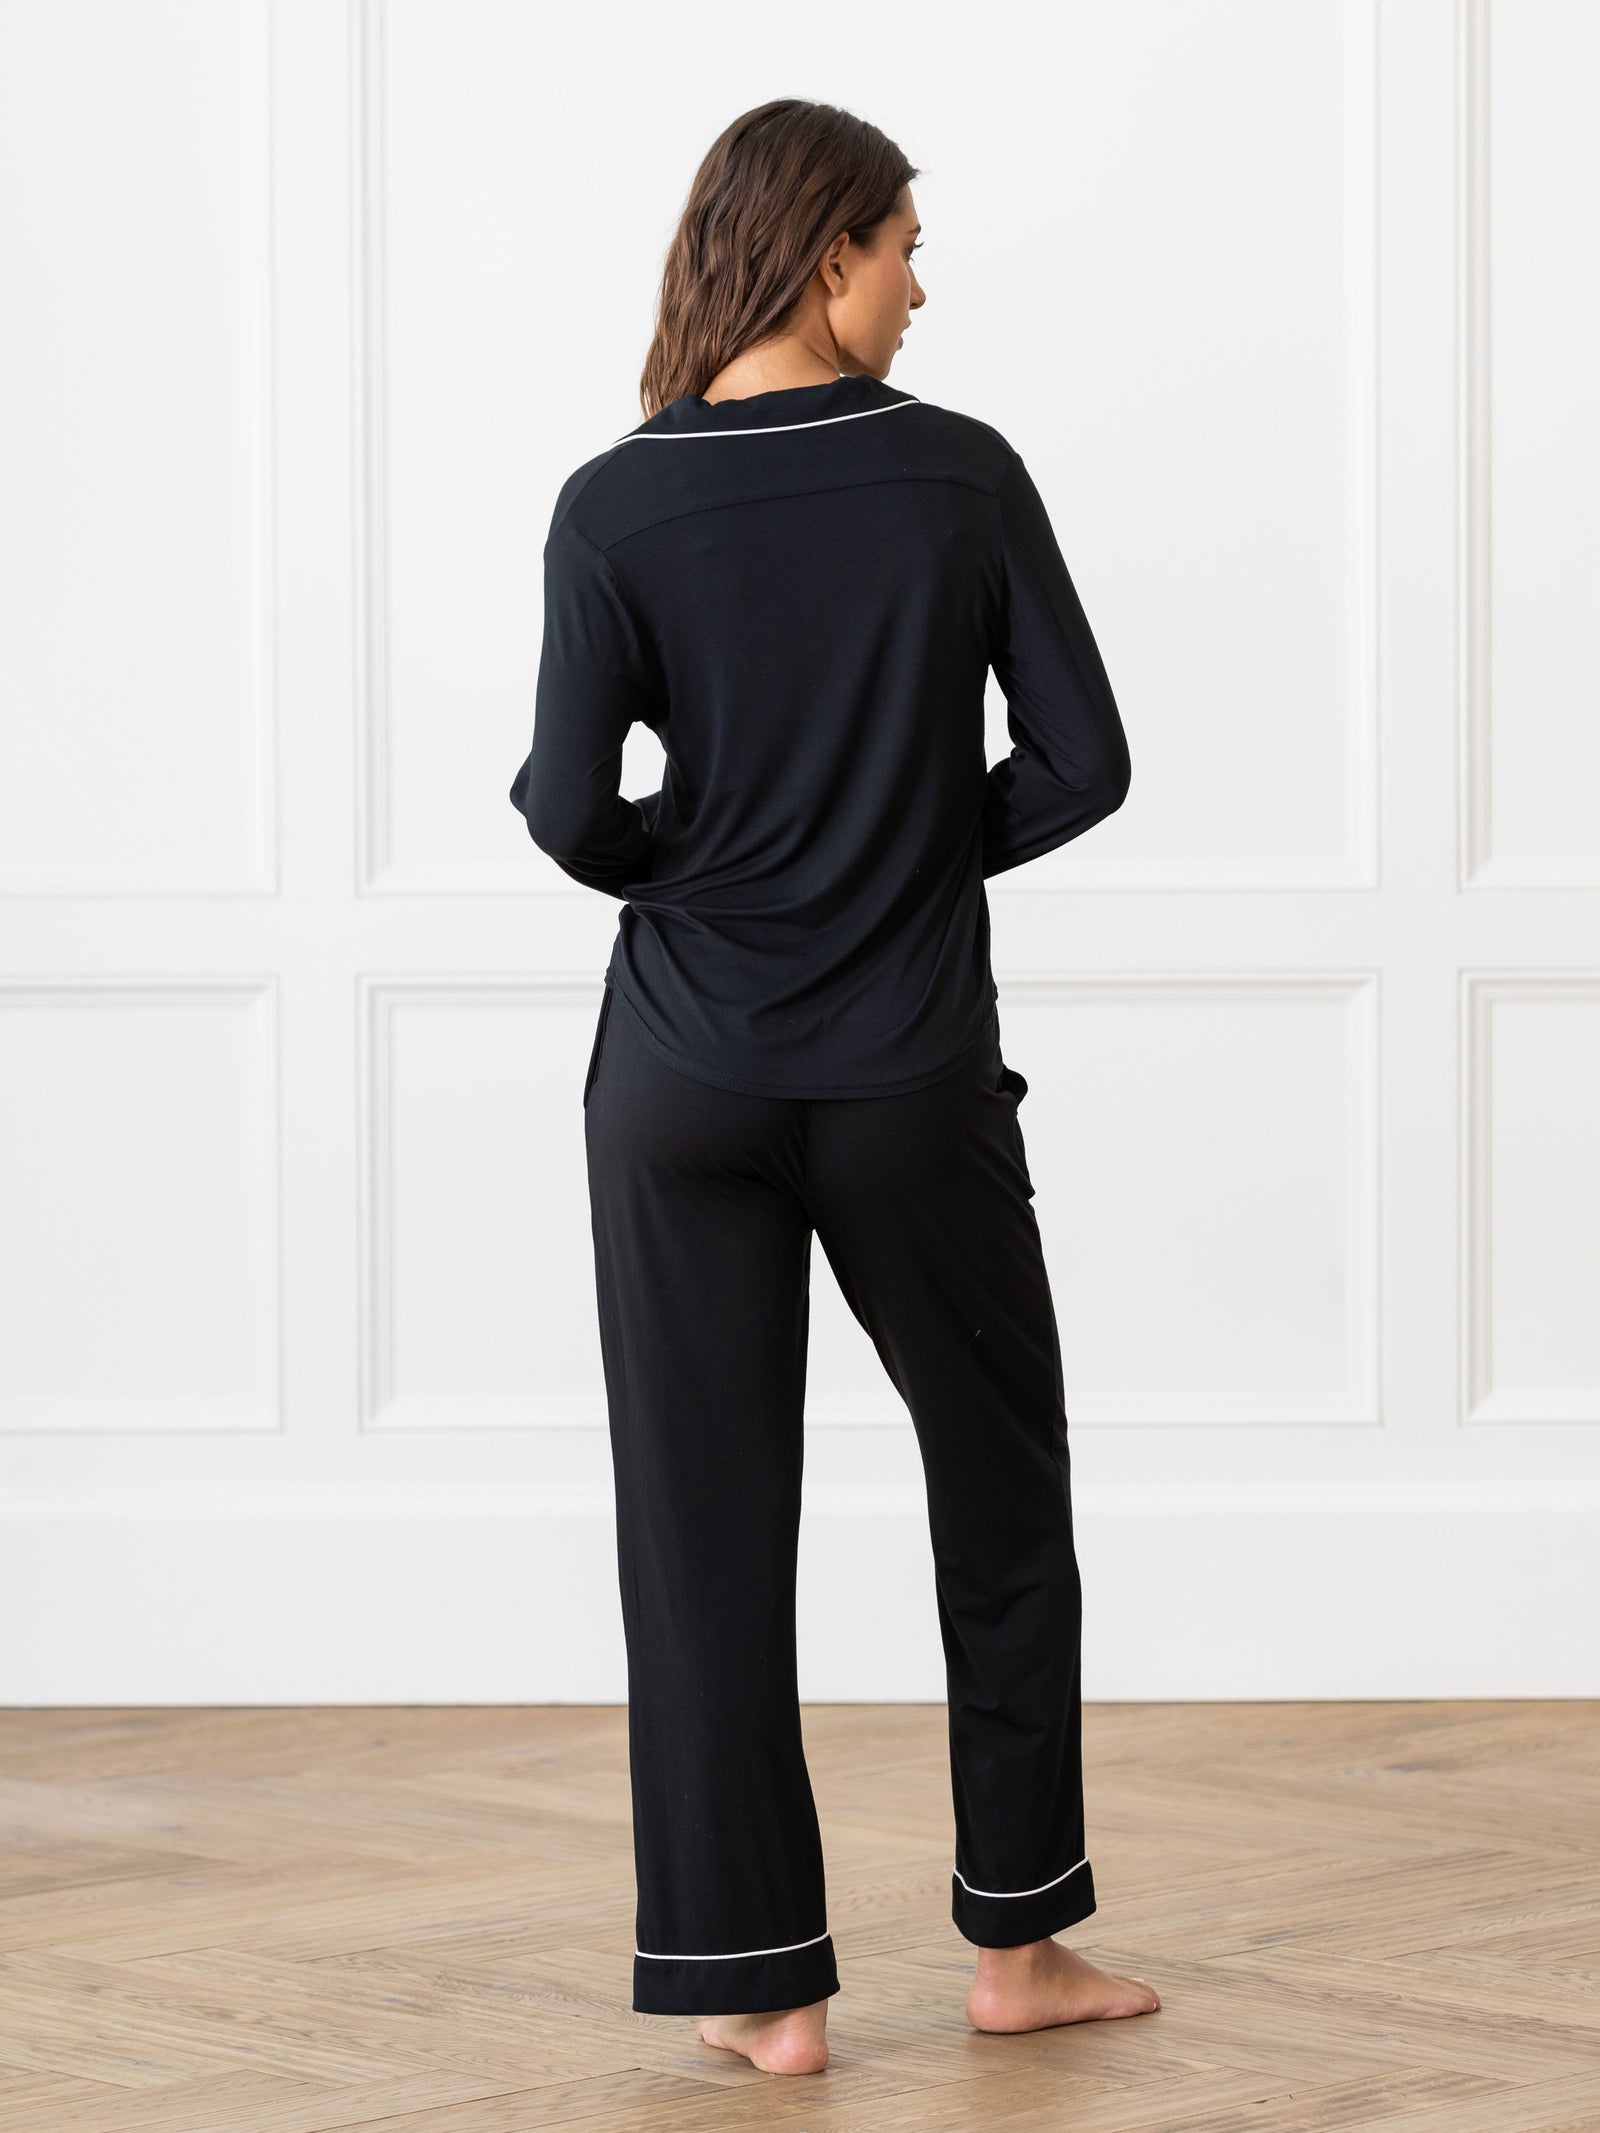 Black Long Sleeve Pajama Set modeled by a woman. The photo was taken in a high contrast setting, showing off the colors and lines of the pajamas. 